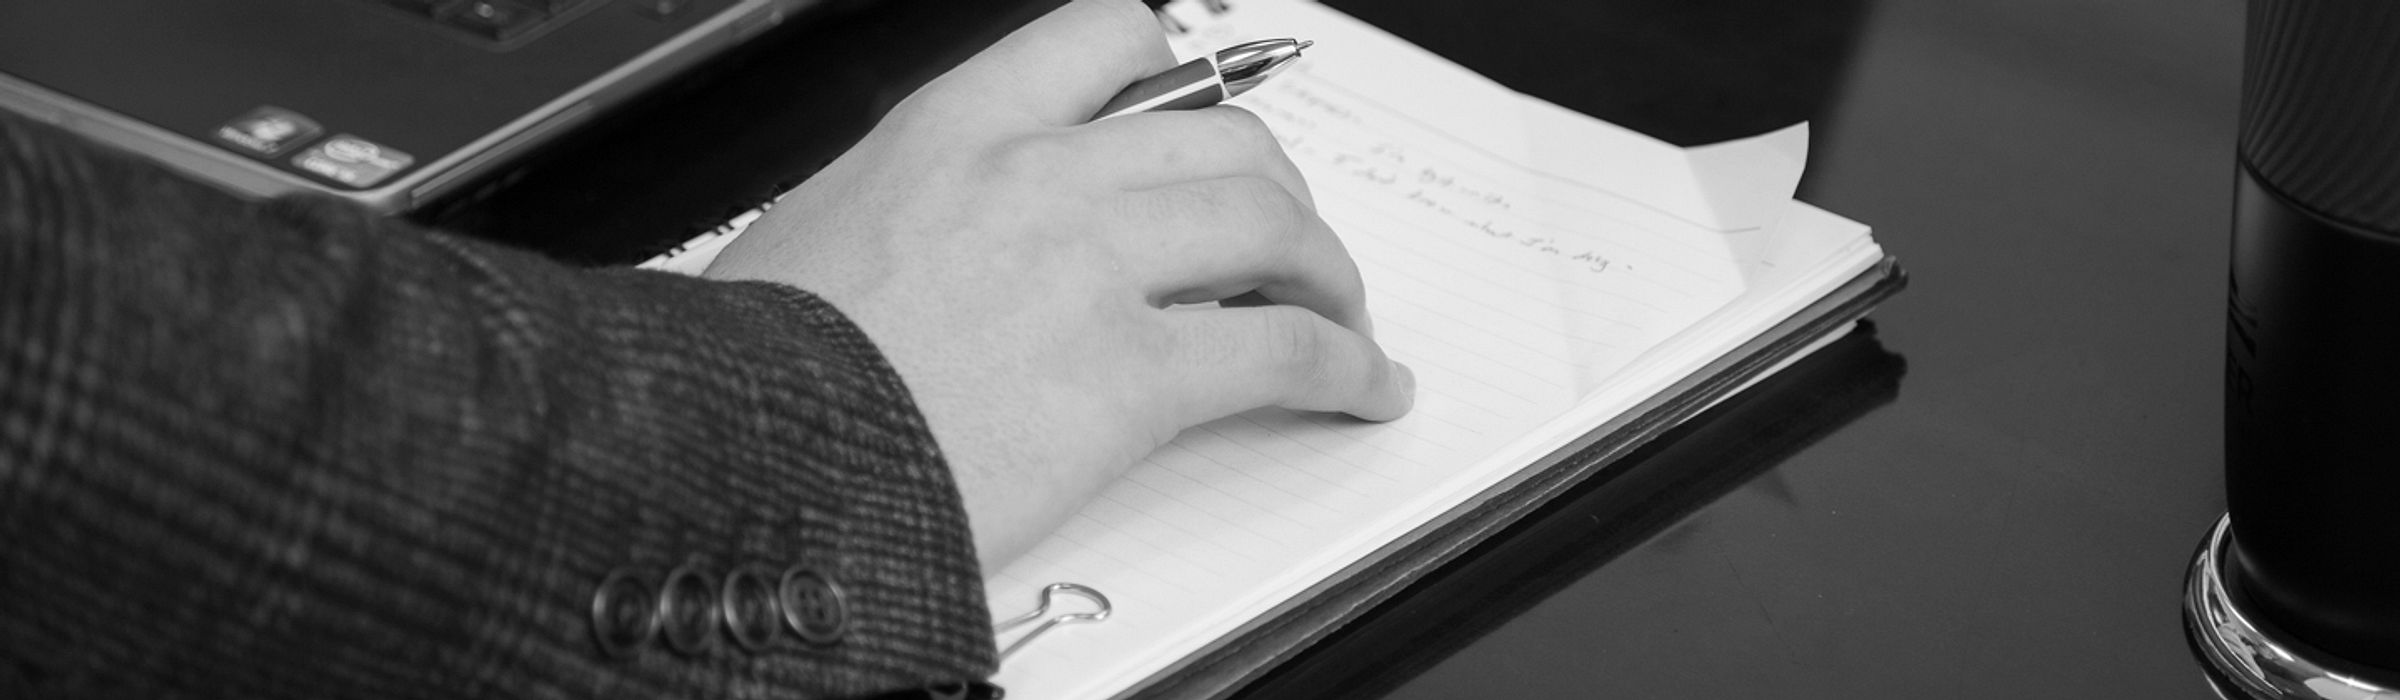 A person holding a pen resting their hand on a notebook